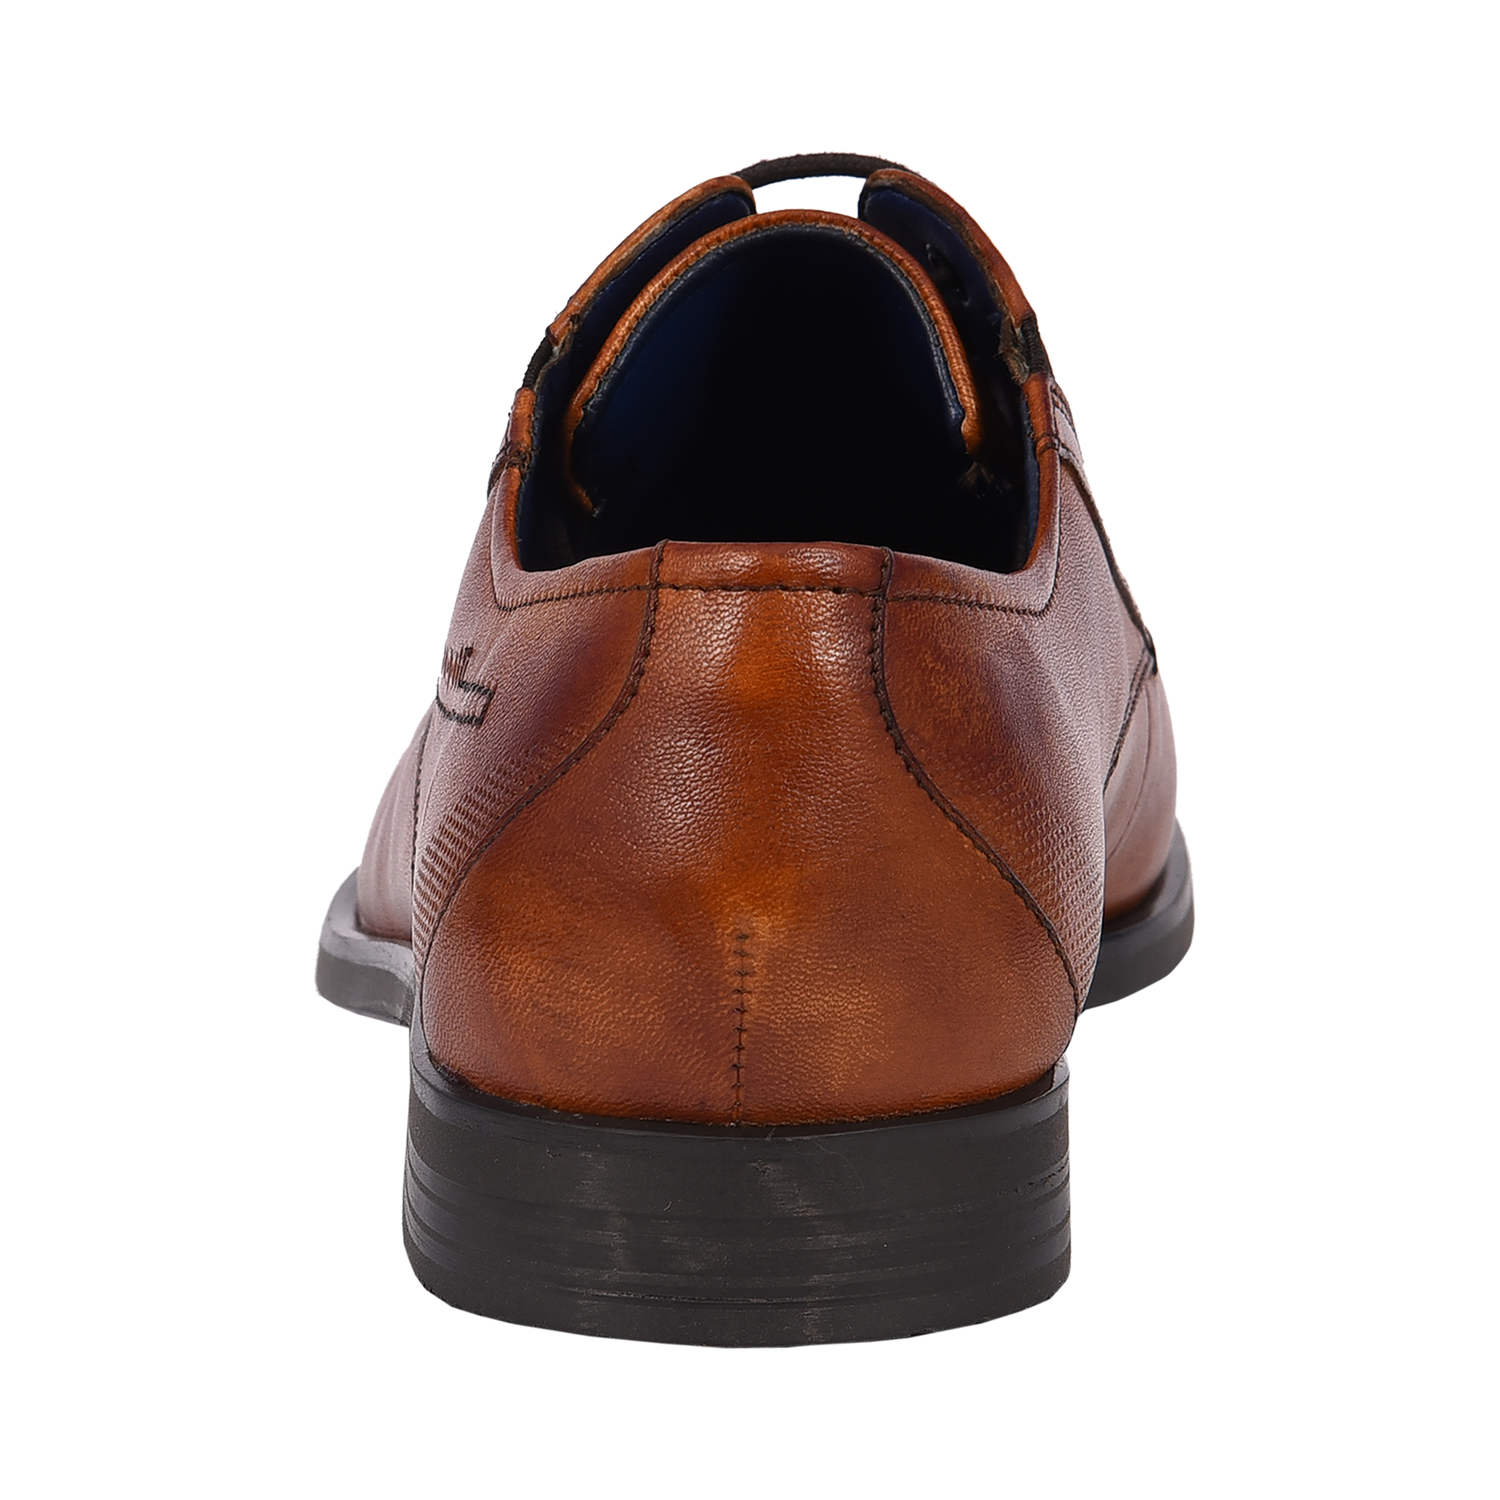 Side view showcasing the thermoplastic rubber sole for durability.